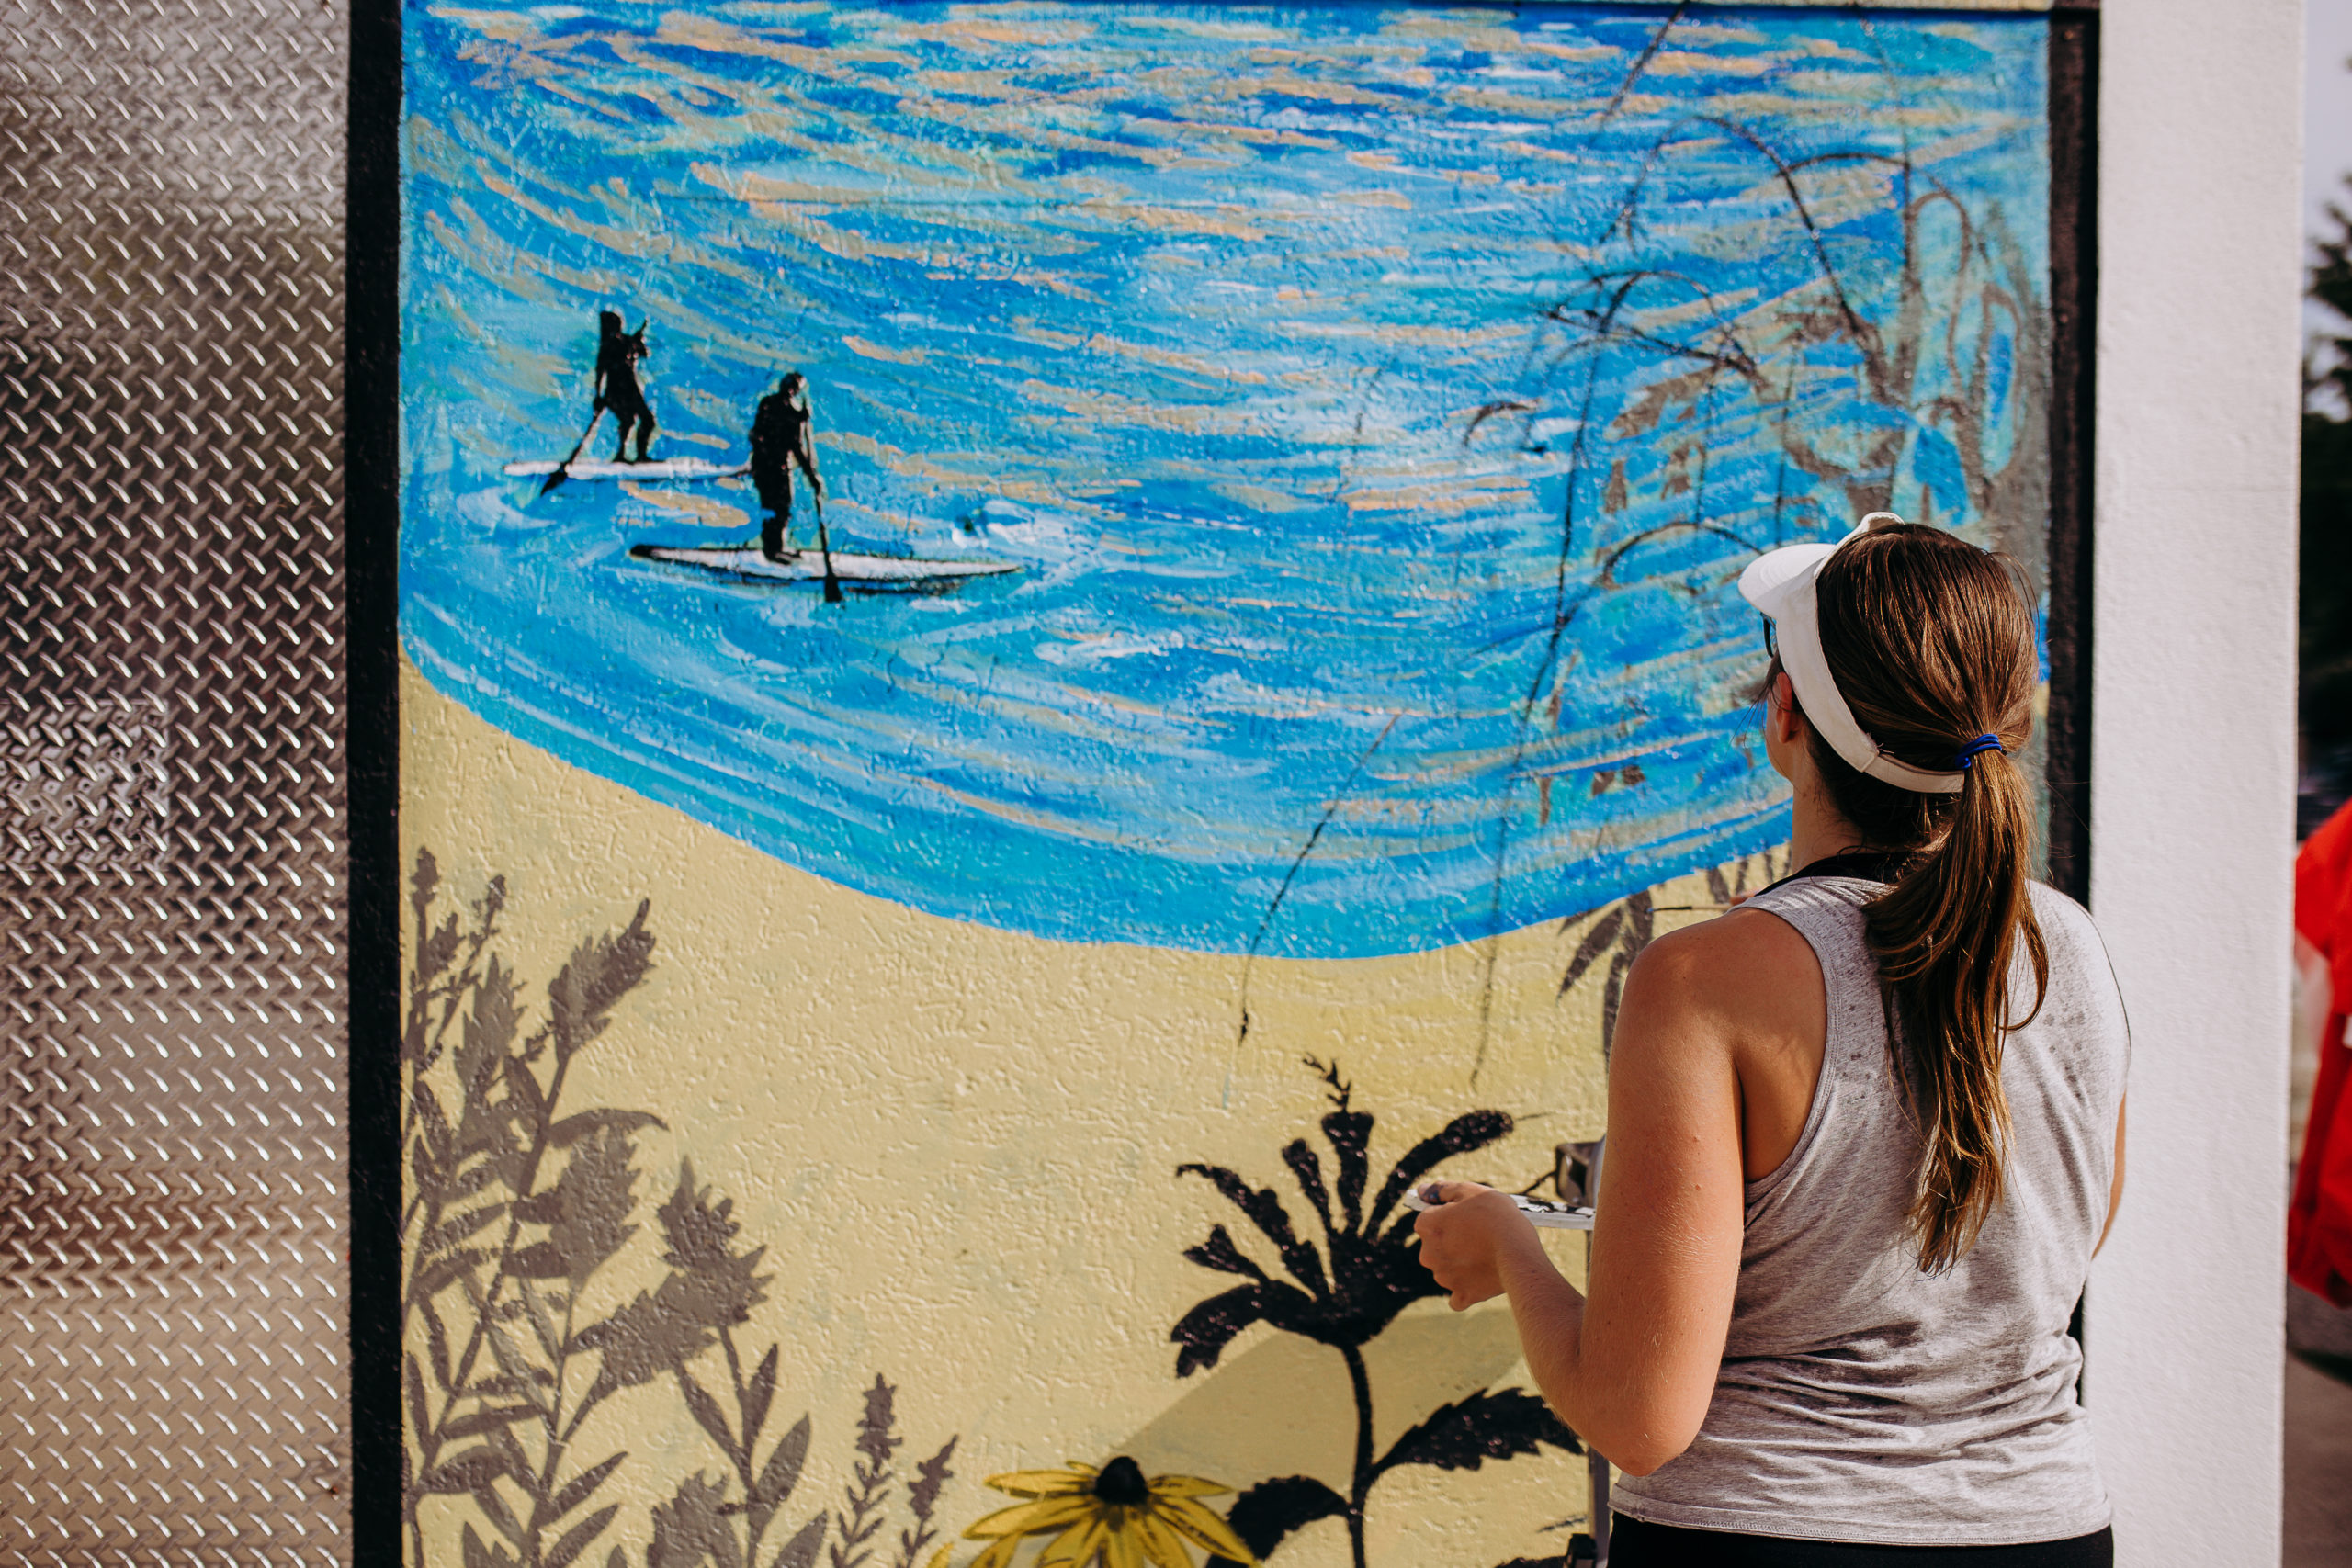 Jocelyn Kearns painting a large outdoor mural depicting soft waters with people paddle boarding.